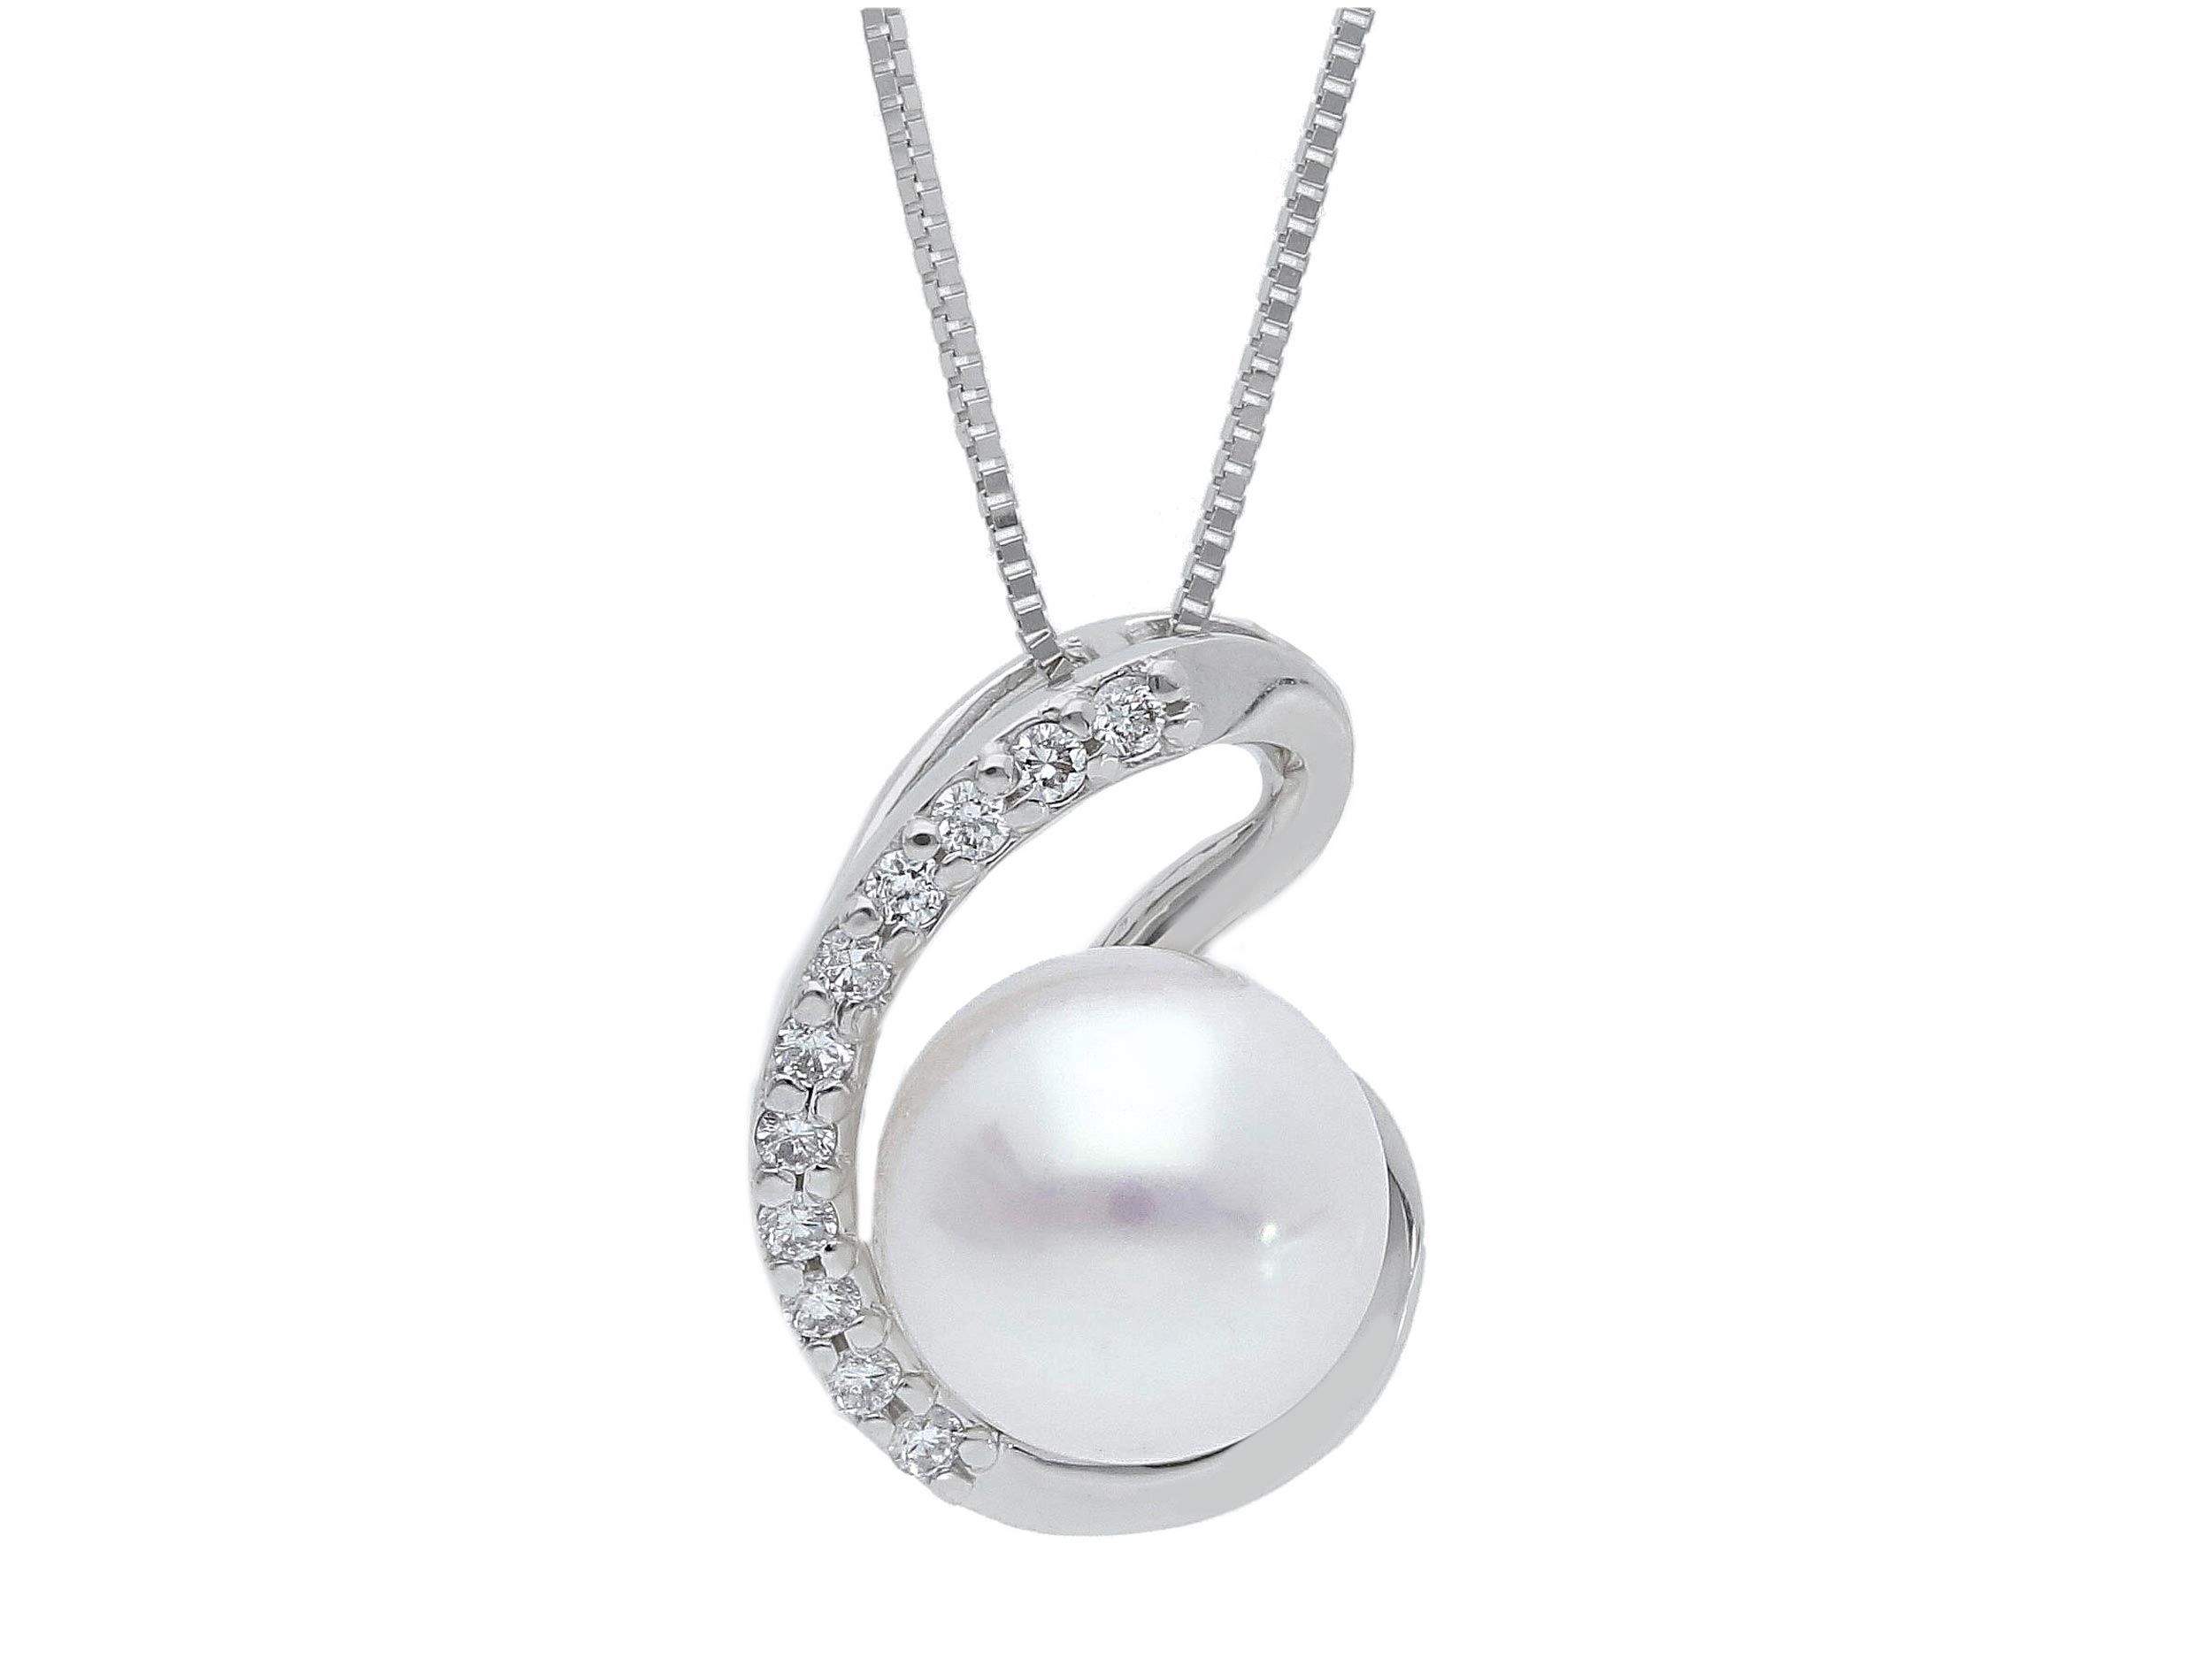  White gold necklace k18 with diamonds αnd pearl (code S253229)